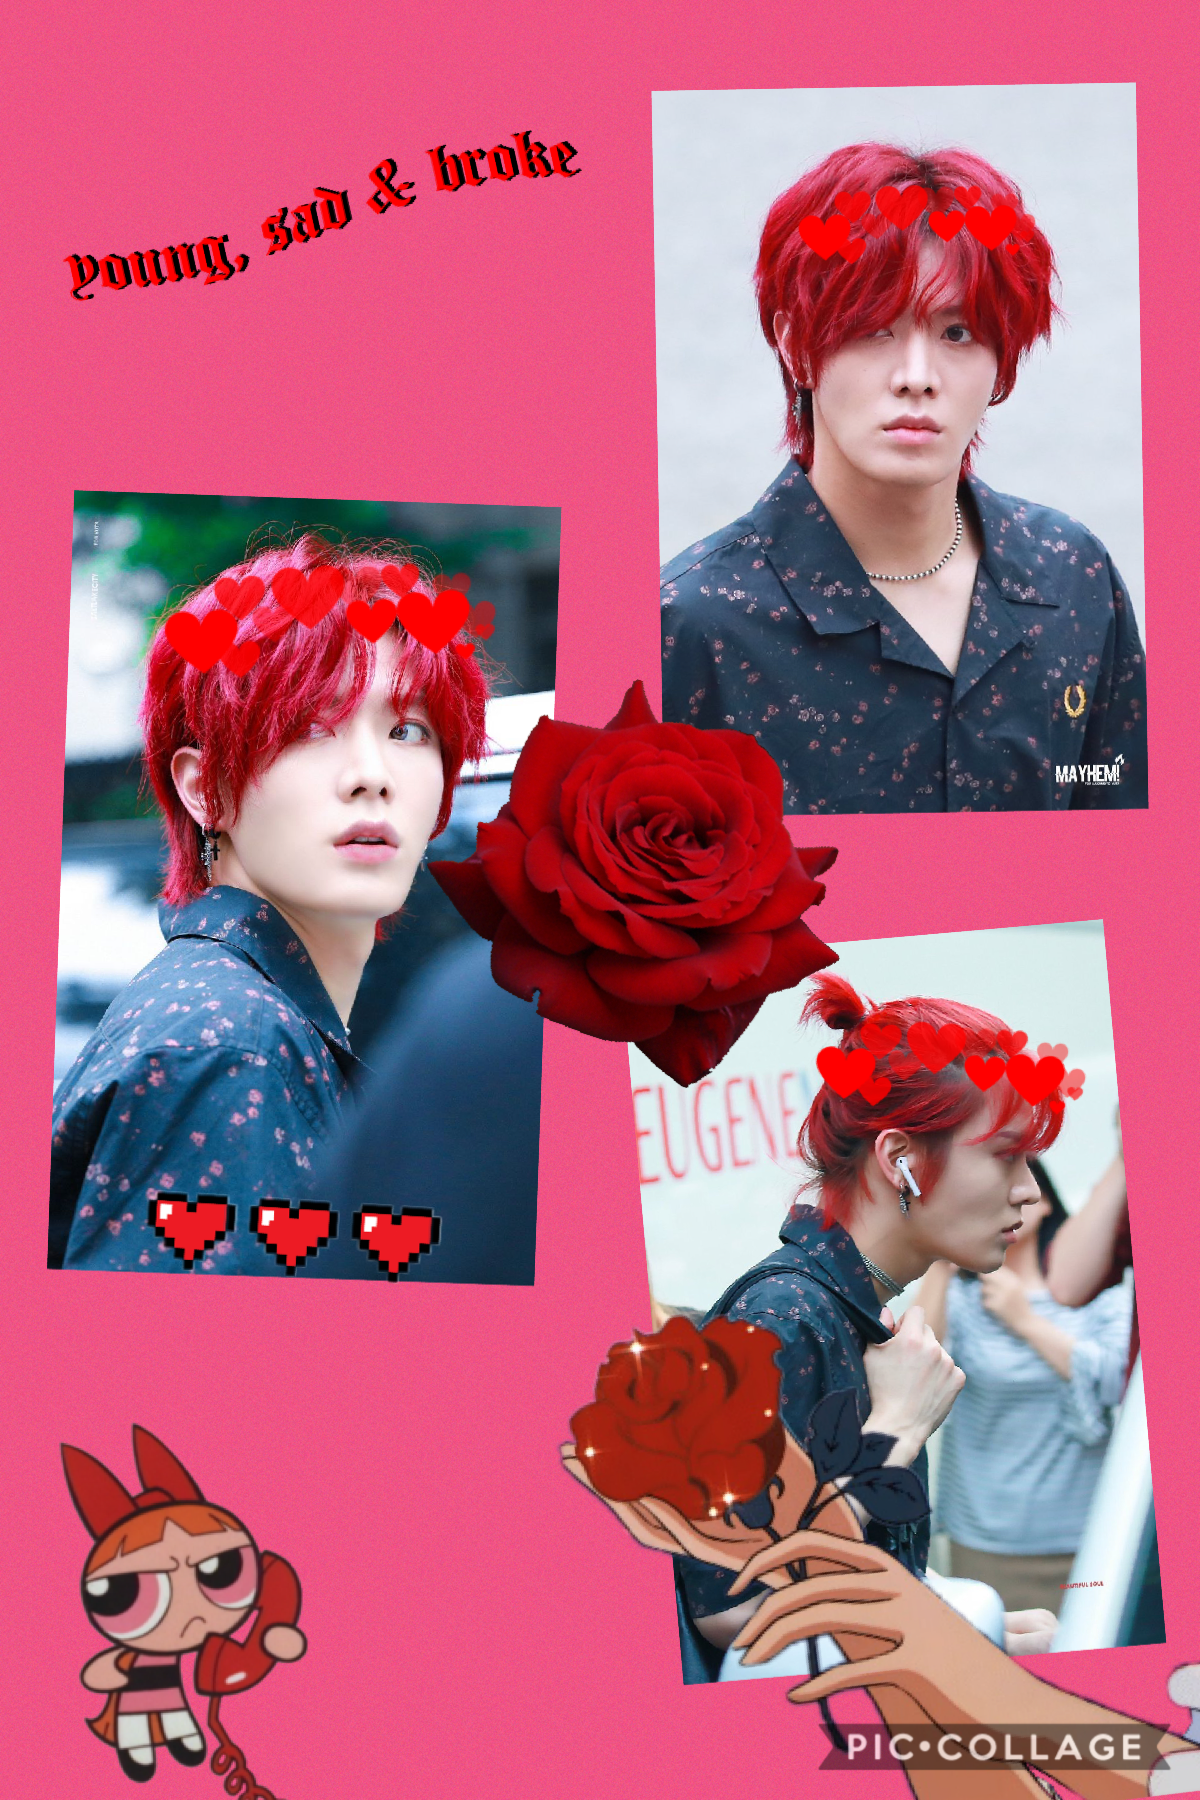 Just some appreciation for Yuta’s red and long hair ❤️❤️❤️❤️